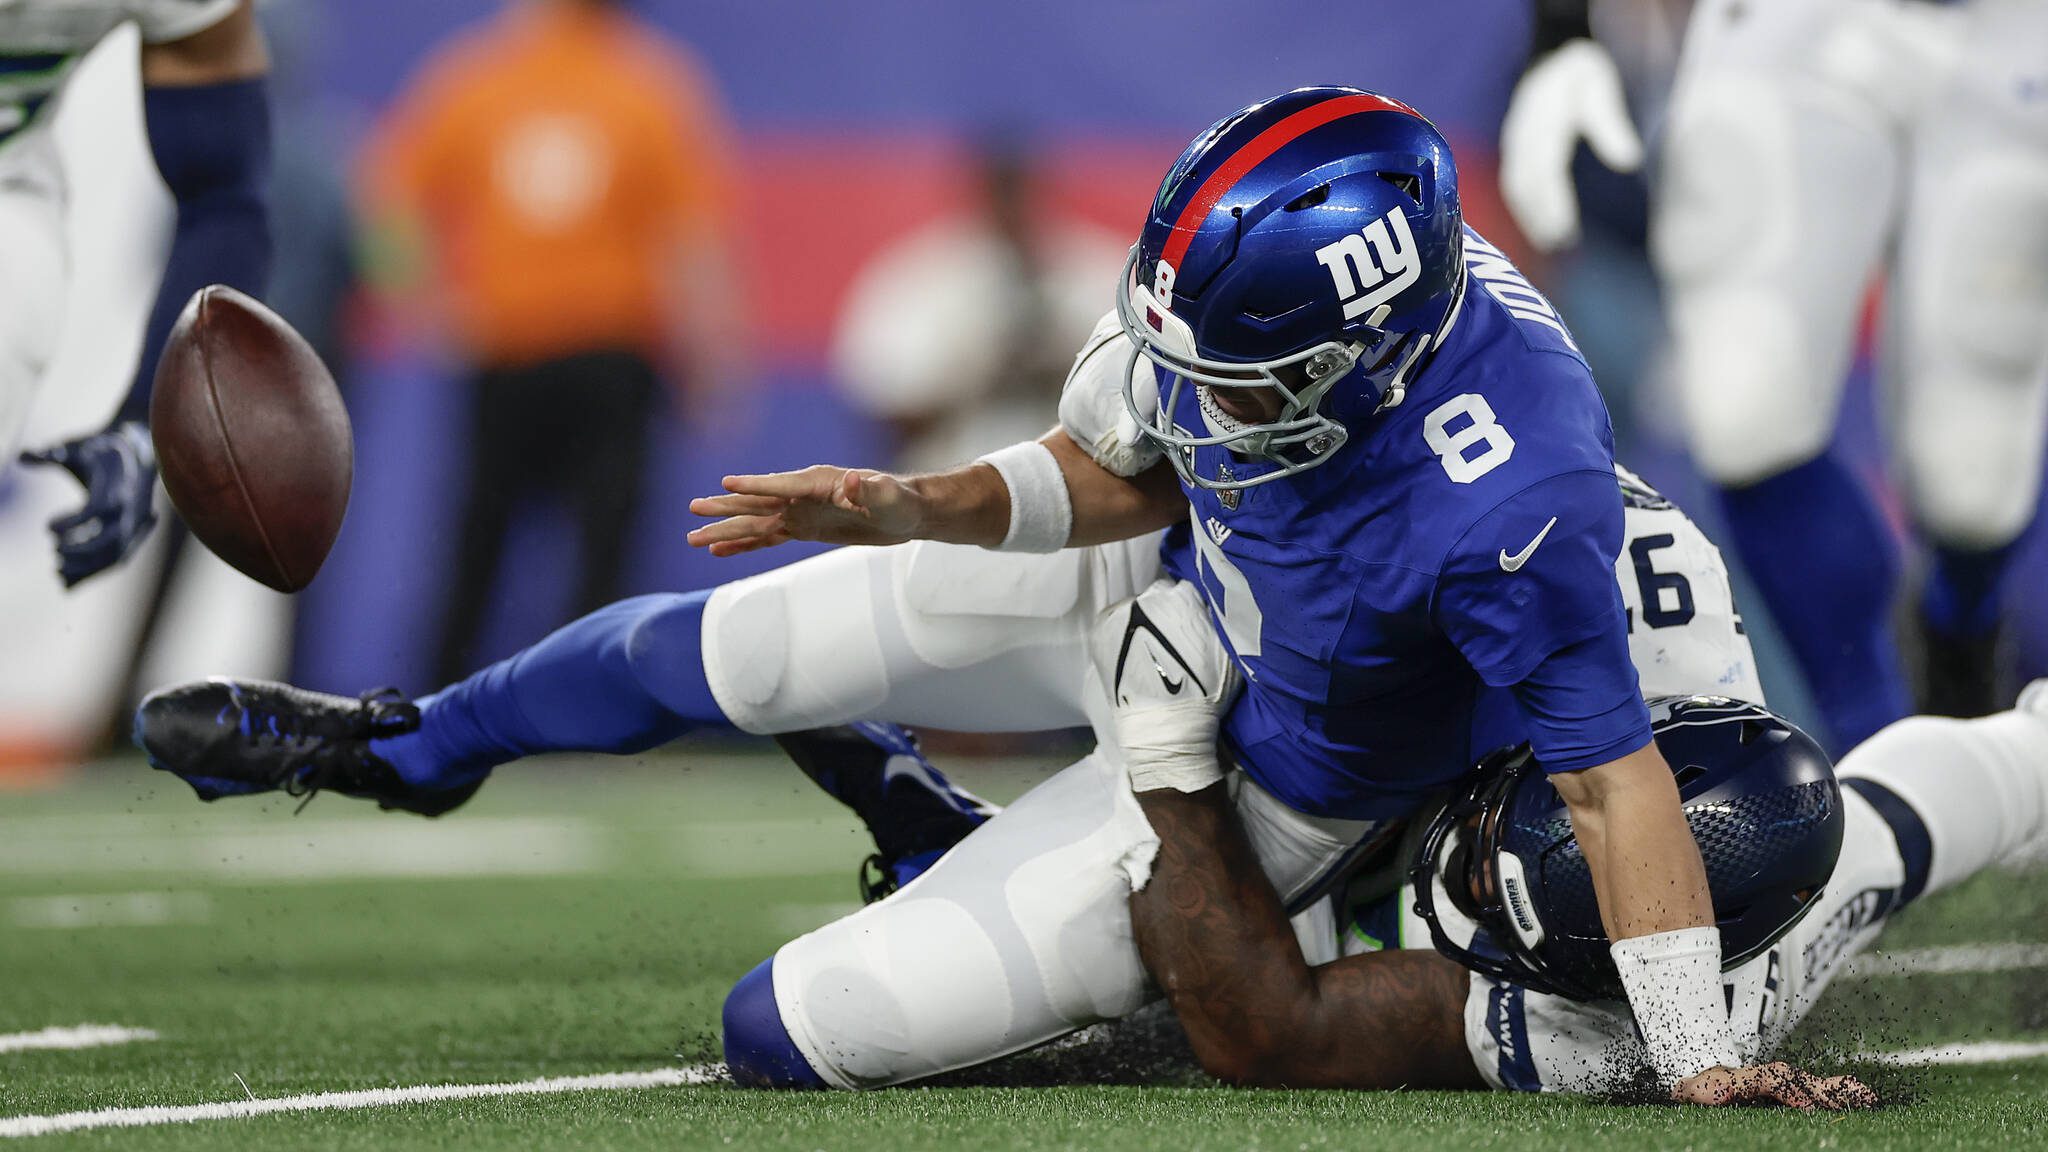 New York Giants quarterback Daniel Jones (8) fumbles the ball as he is sacked by Seattle Seahawks defensive end Mario Edwards Jr. (97) during the second quarter Monday. (AP Photo/Adam Hunger)